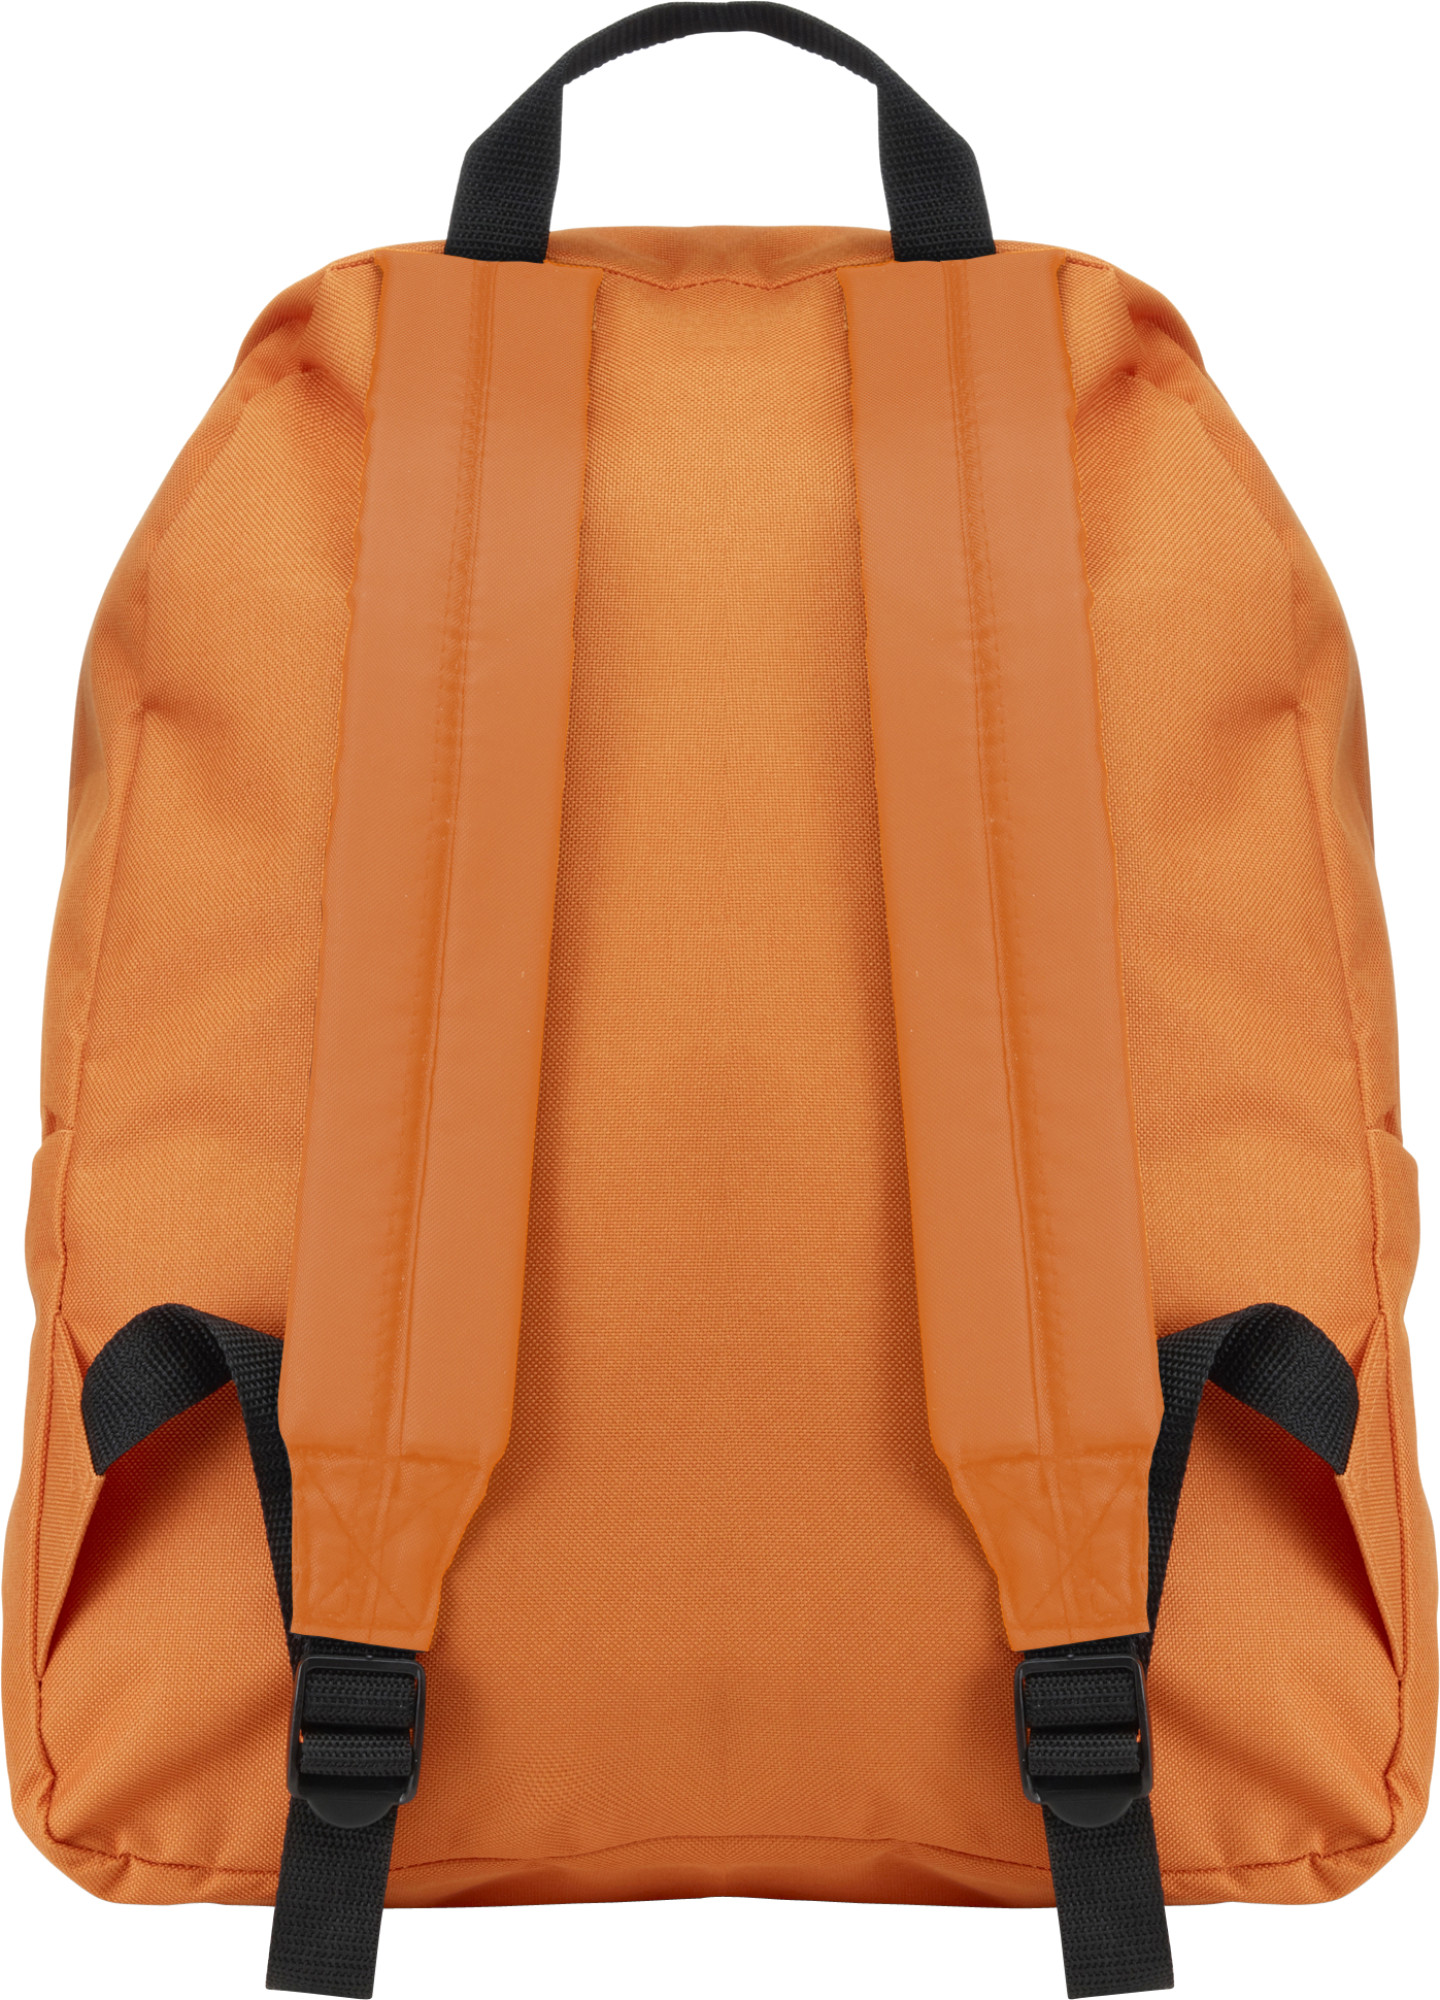 Printed Polyester backpack